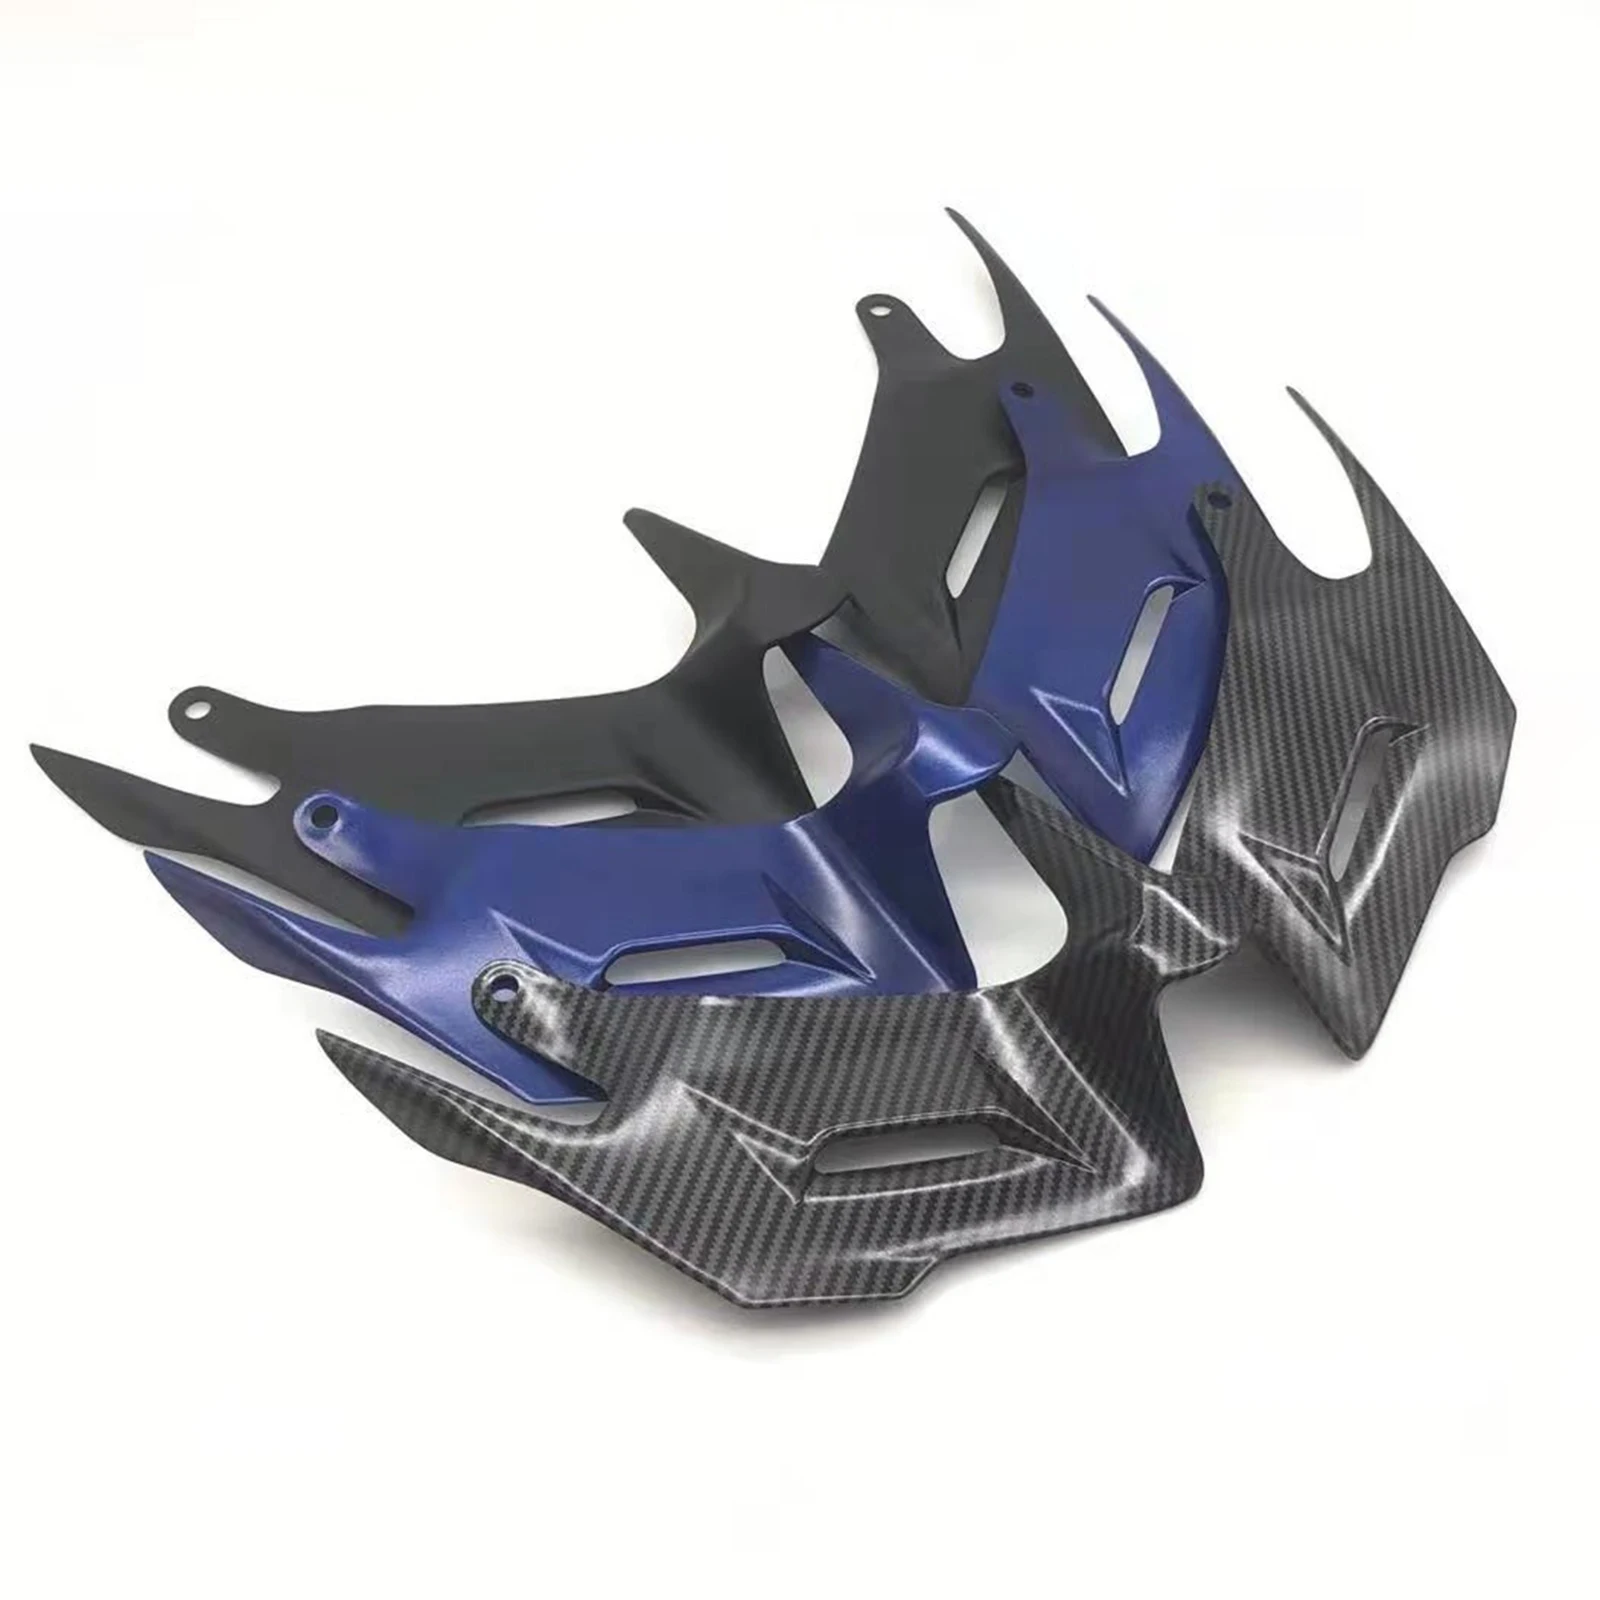 Fairing Aerodynamic Winglets Front Cover for Yamaha YZF R3 R25 2014-2018 Carbon Fiber Style Motorcycle Motorcycle Wind Wing